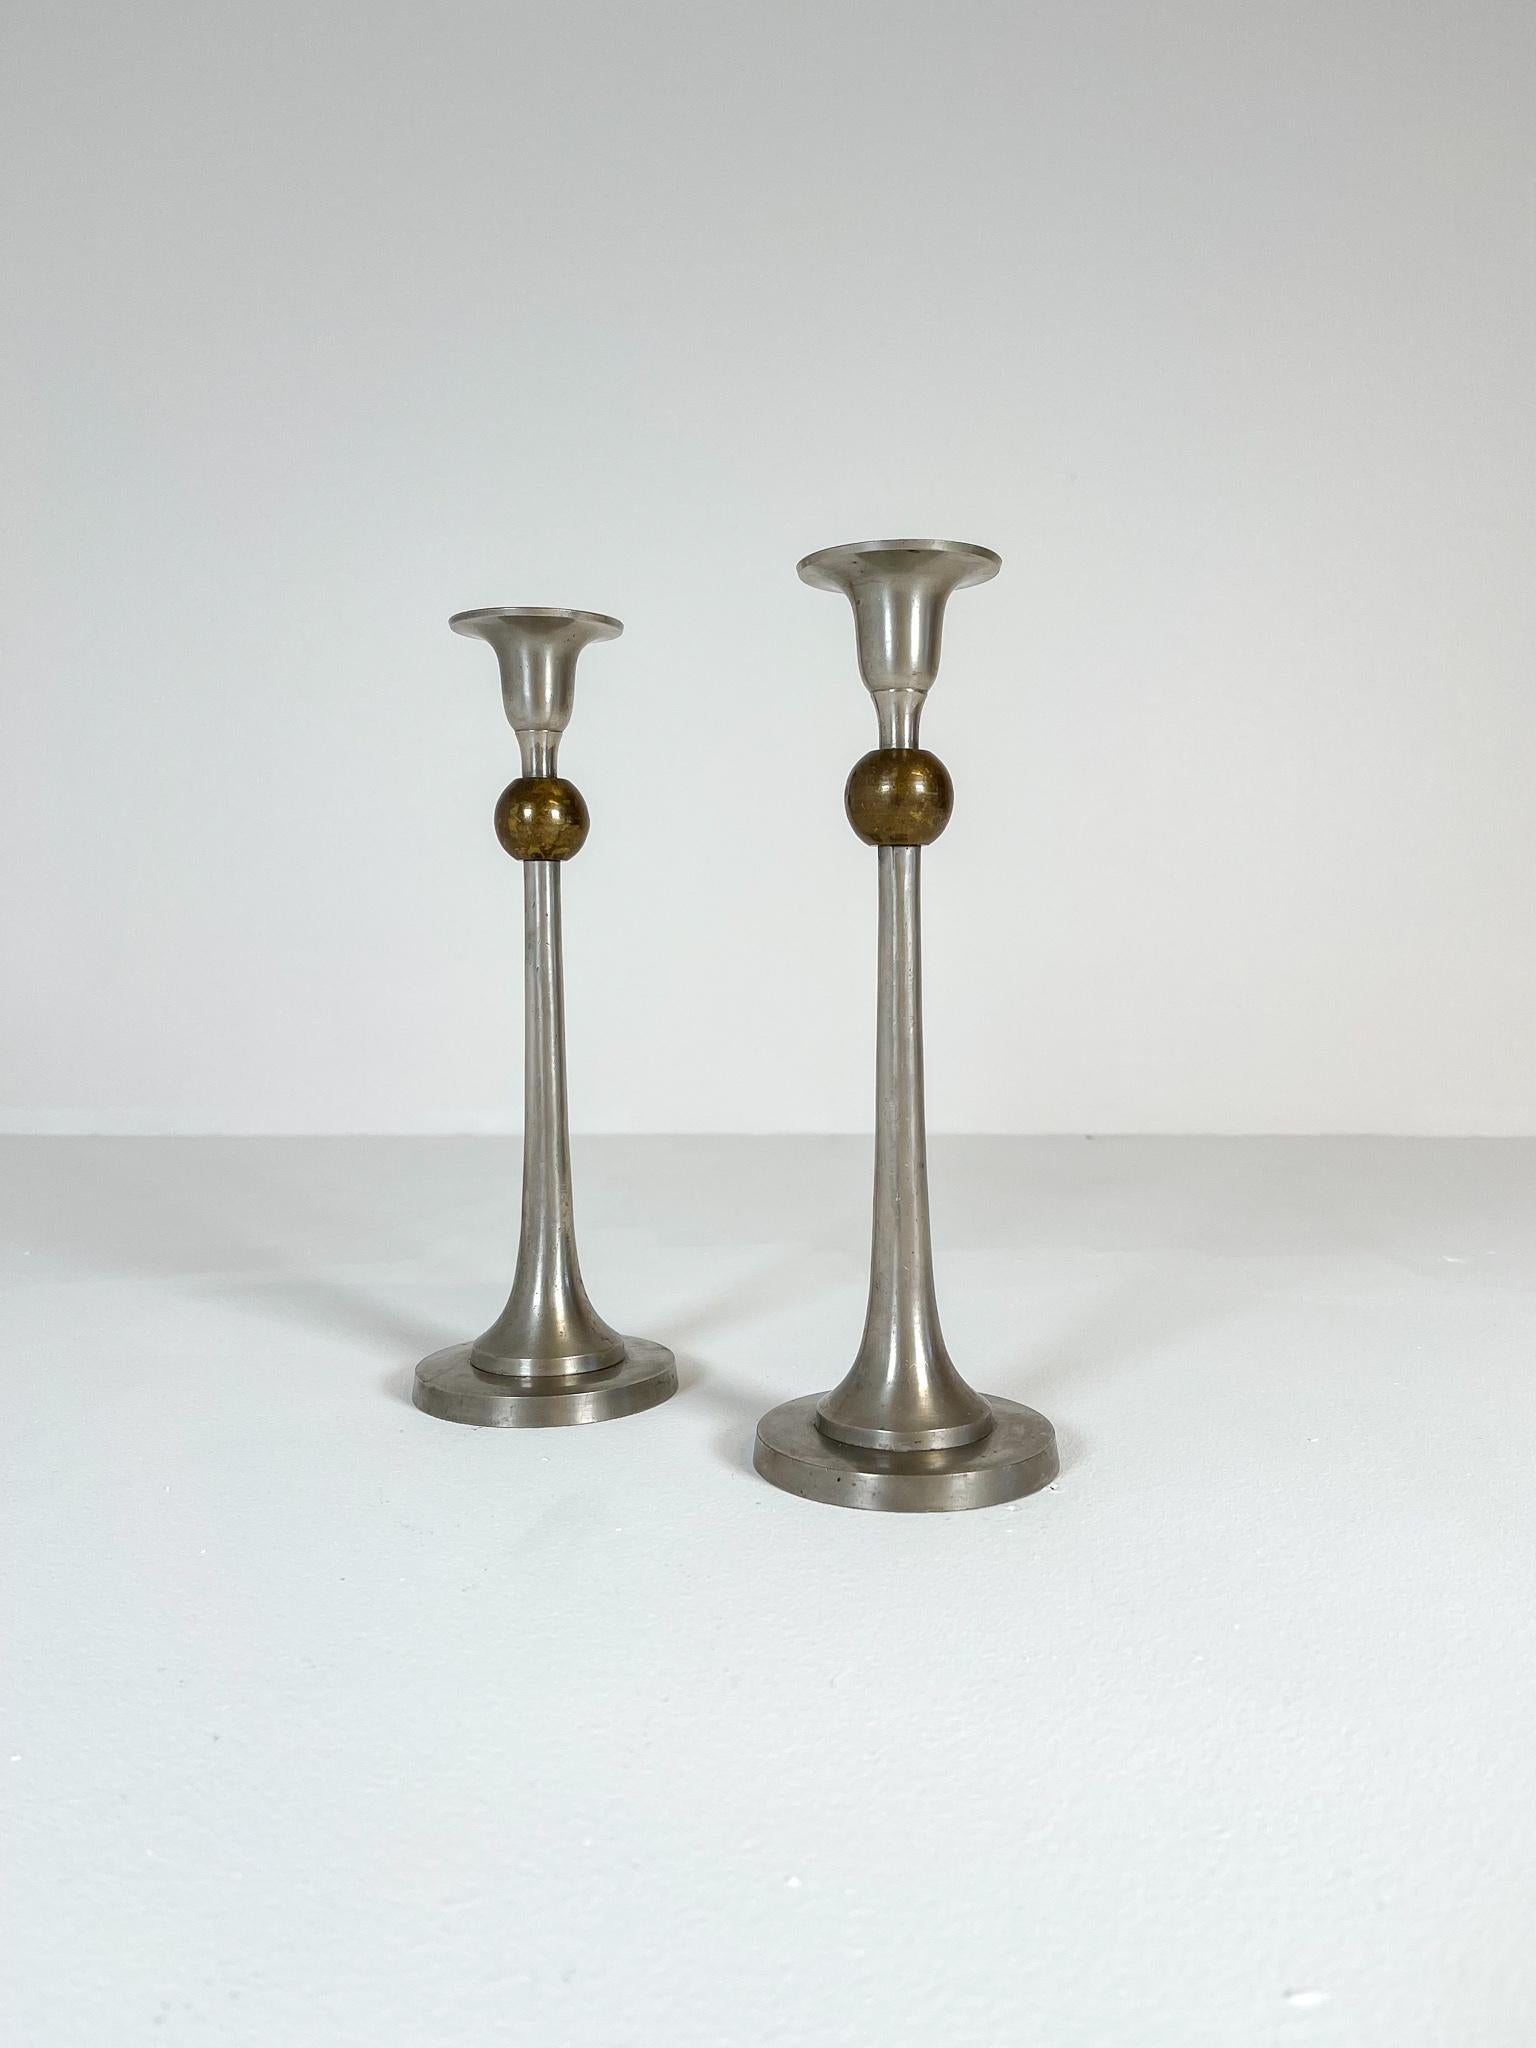 Art Deco candle holders made in pewter and brass made in Sweden during the 1930s. These ones wonderfully sculptured and crafted in a true art deco shape with the base and top in pewter with a ball in brass. 

Good vintage condition with some